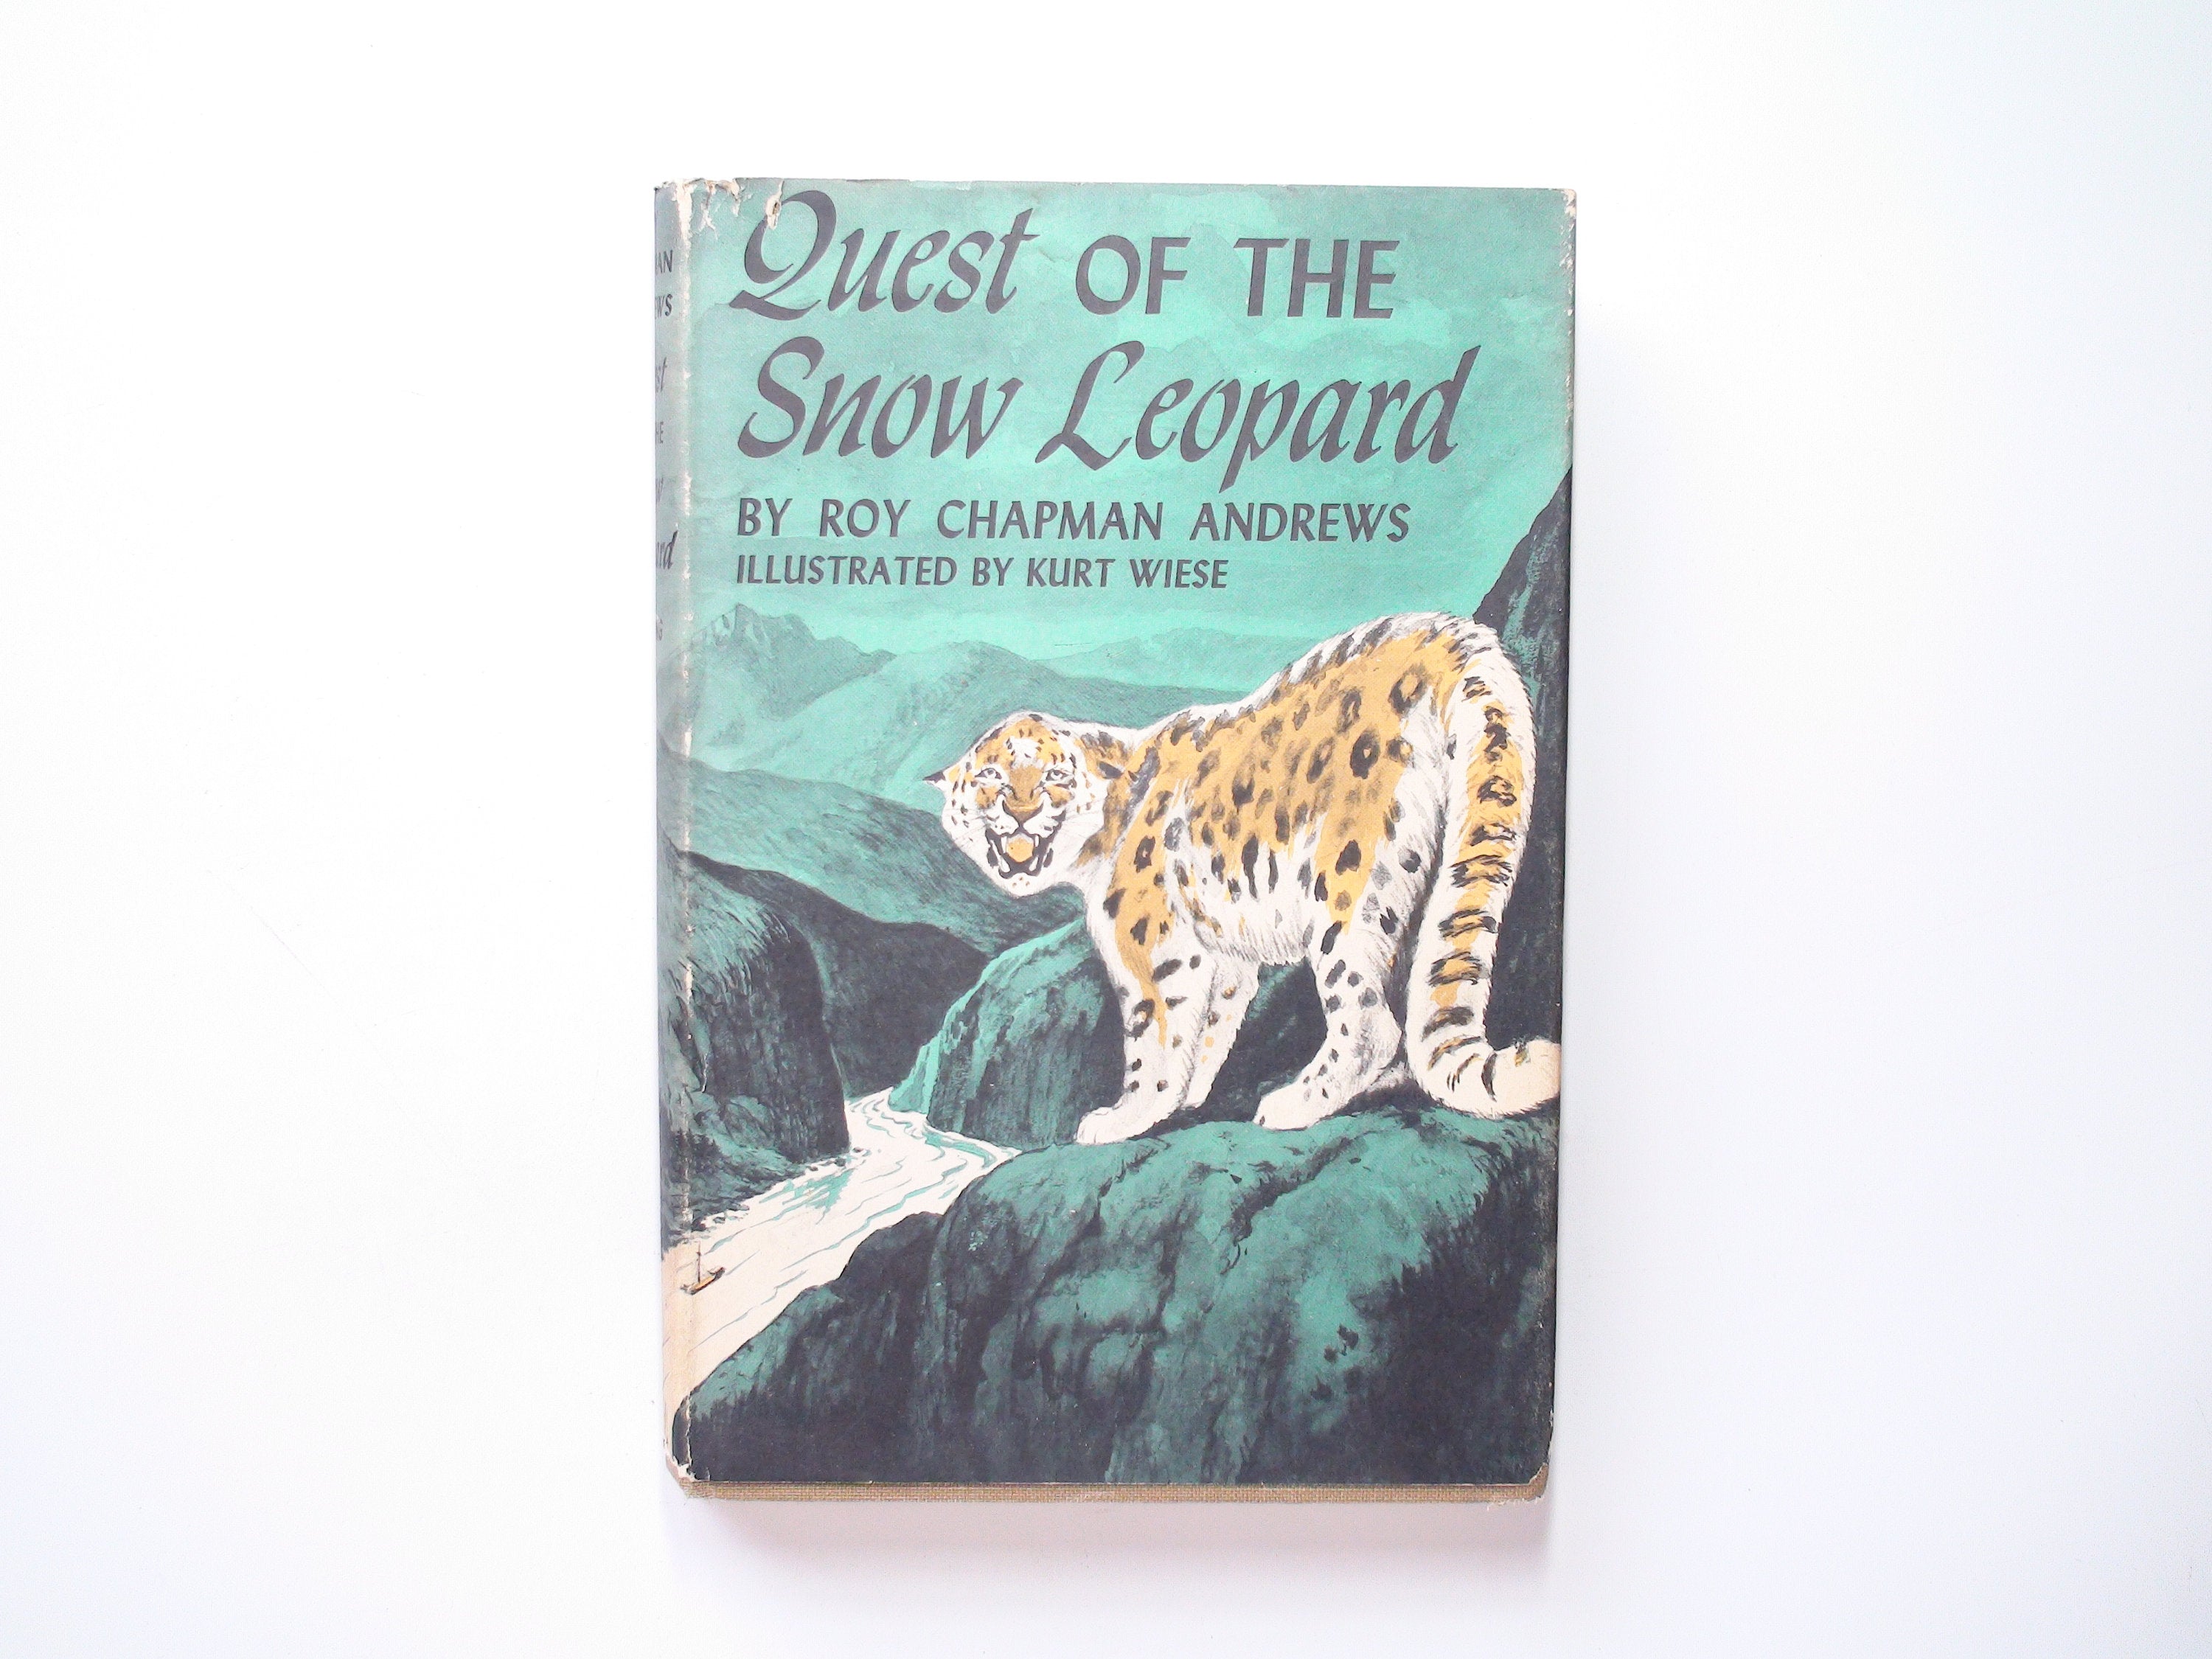 Quest of the Snow Leopard by Roy Chapman Andrews, Hardcover w/ D/J, 1st Ed, 1956